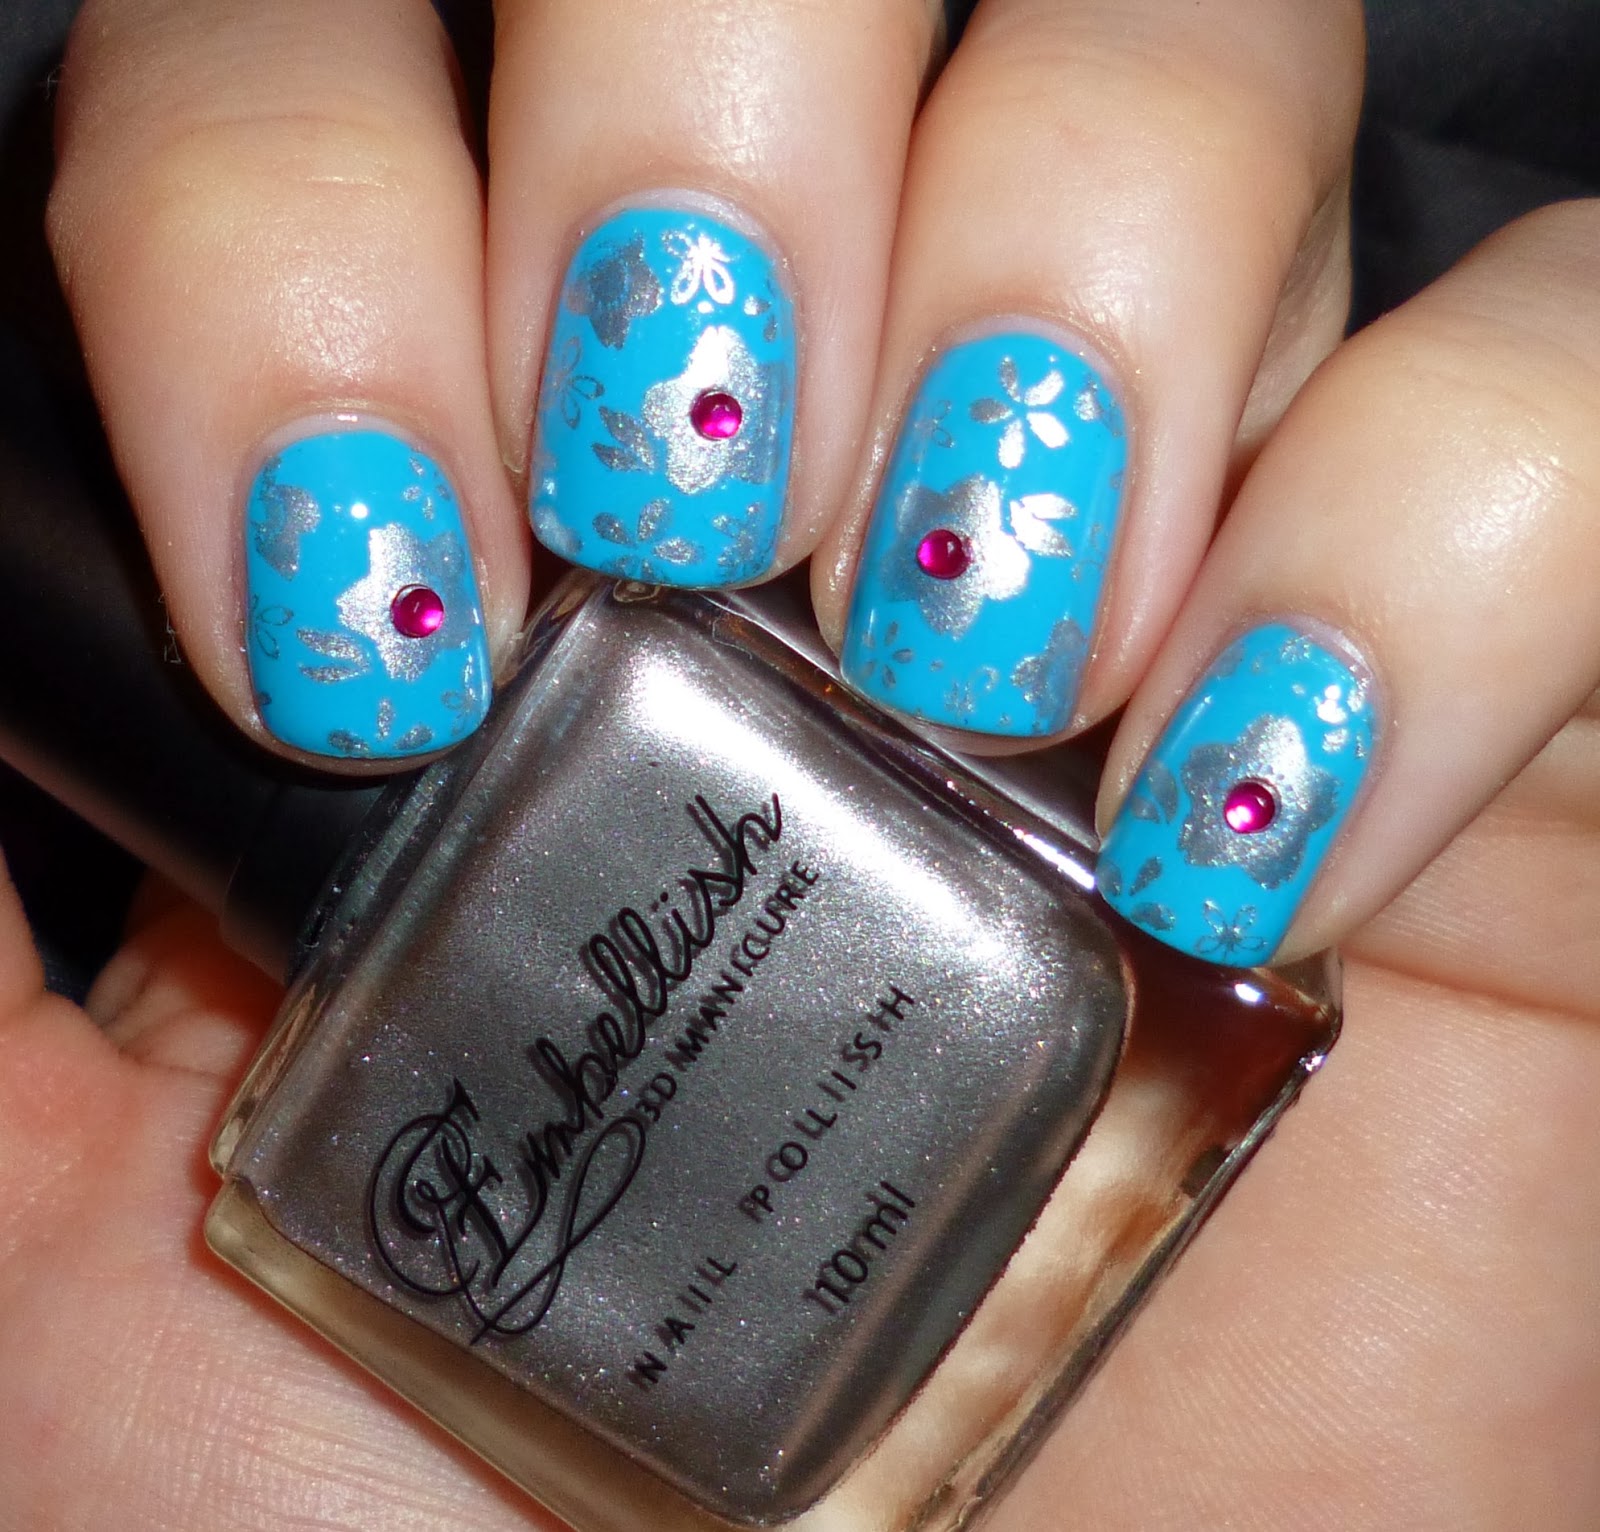 Lou is Perfectly Polished: Blue Glint and Flowers